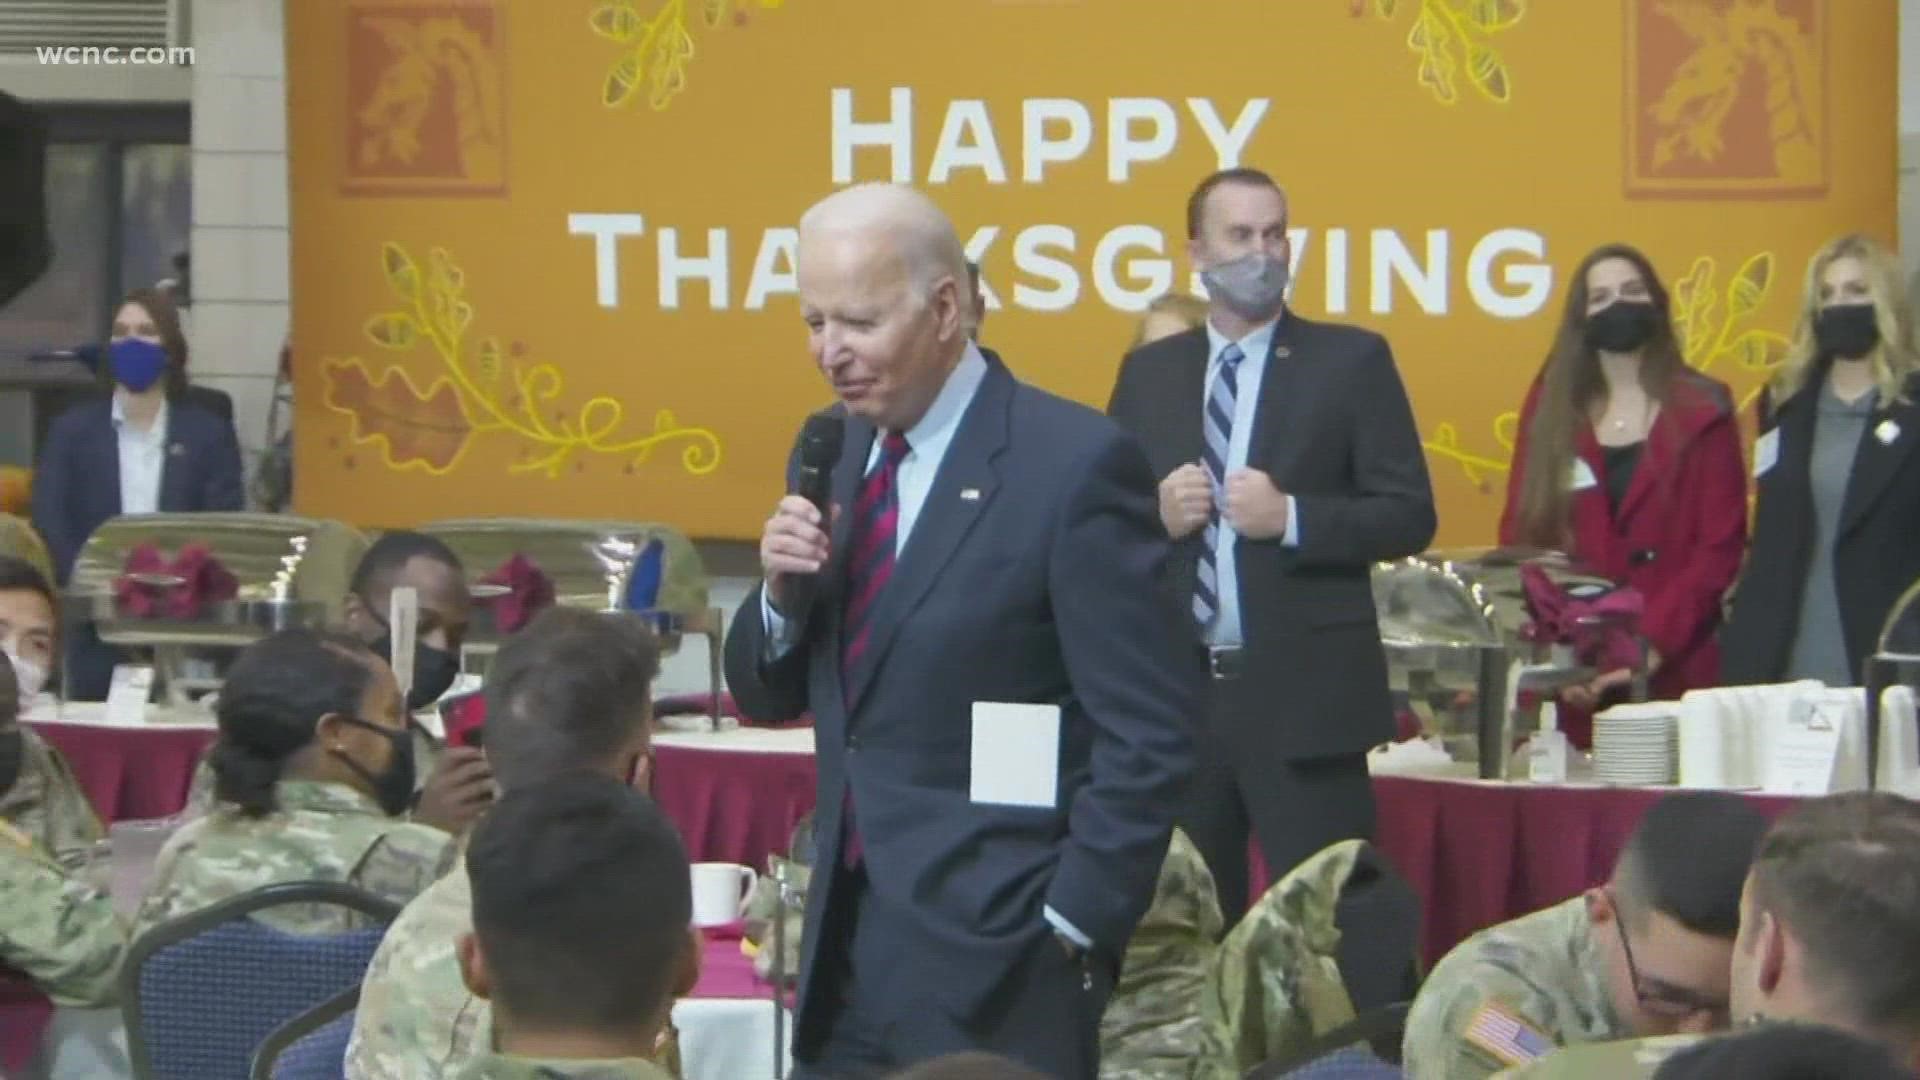 President Joe Biden and First Lady Jill Biden are there - celebrating an early Thanksgiving with troops and their families.